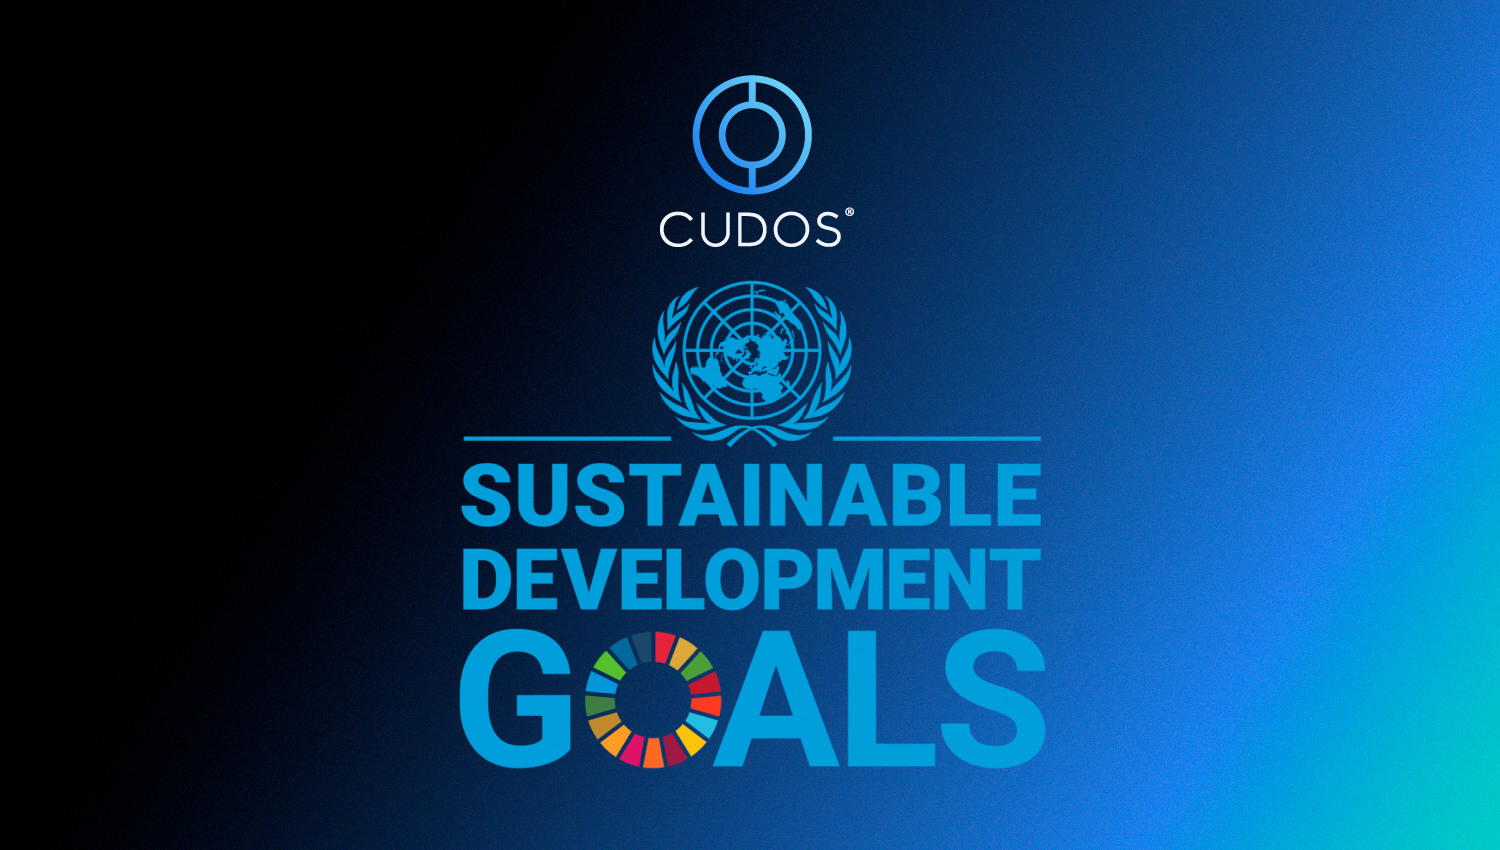 Cudos’ commitment to UN’s sustainable development goals